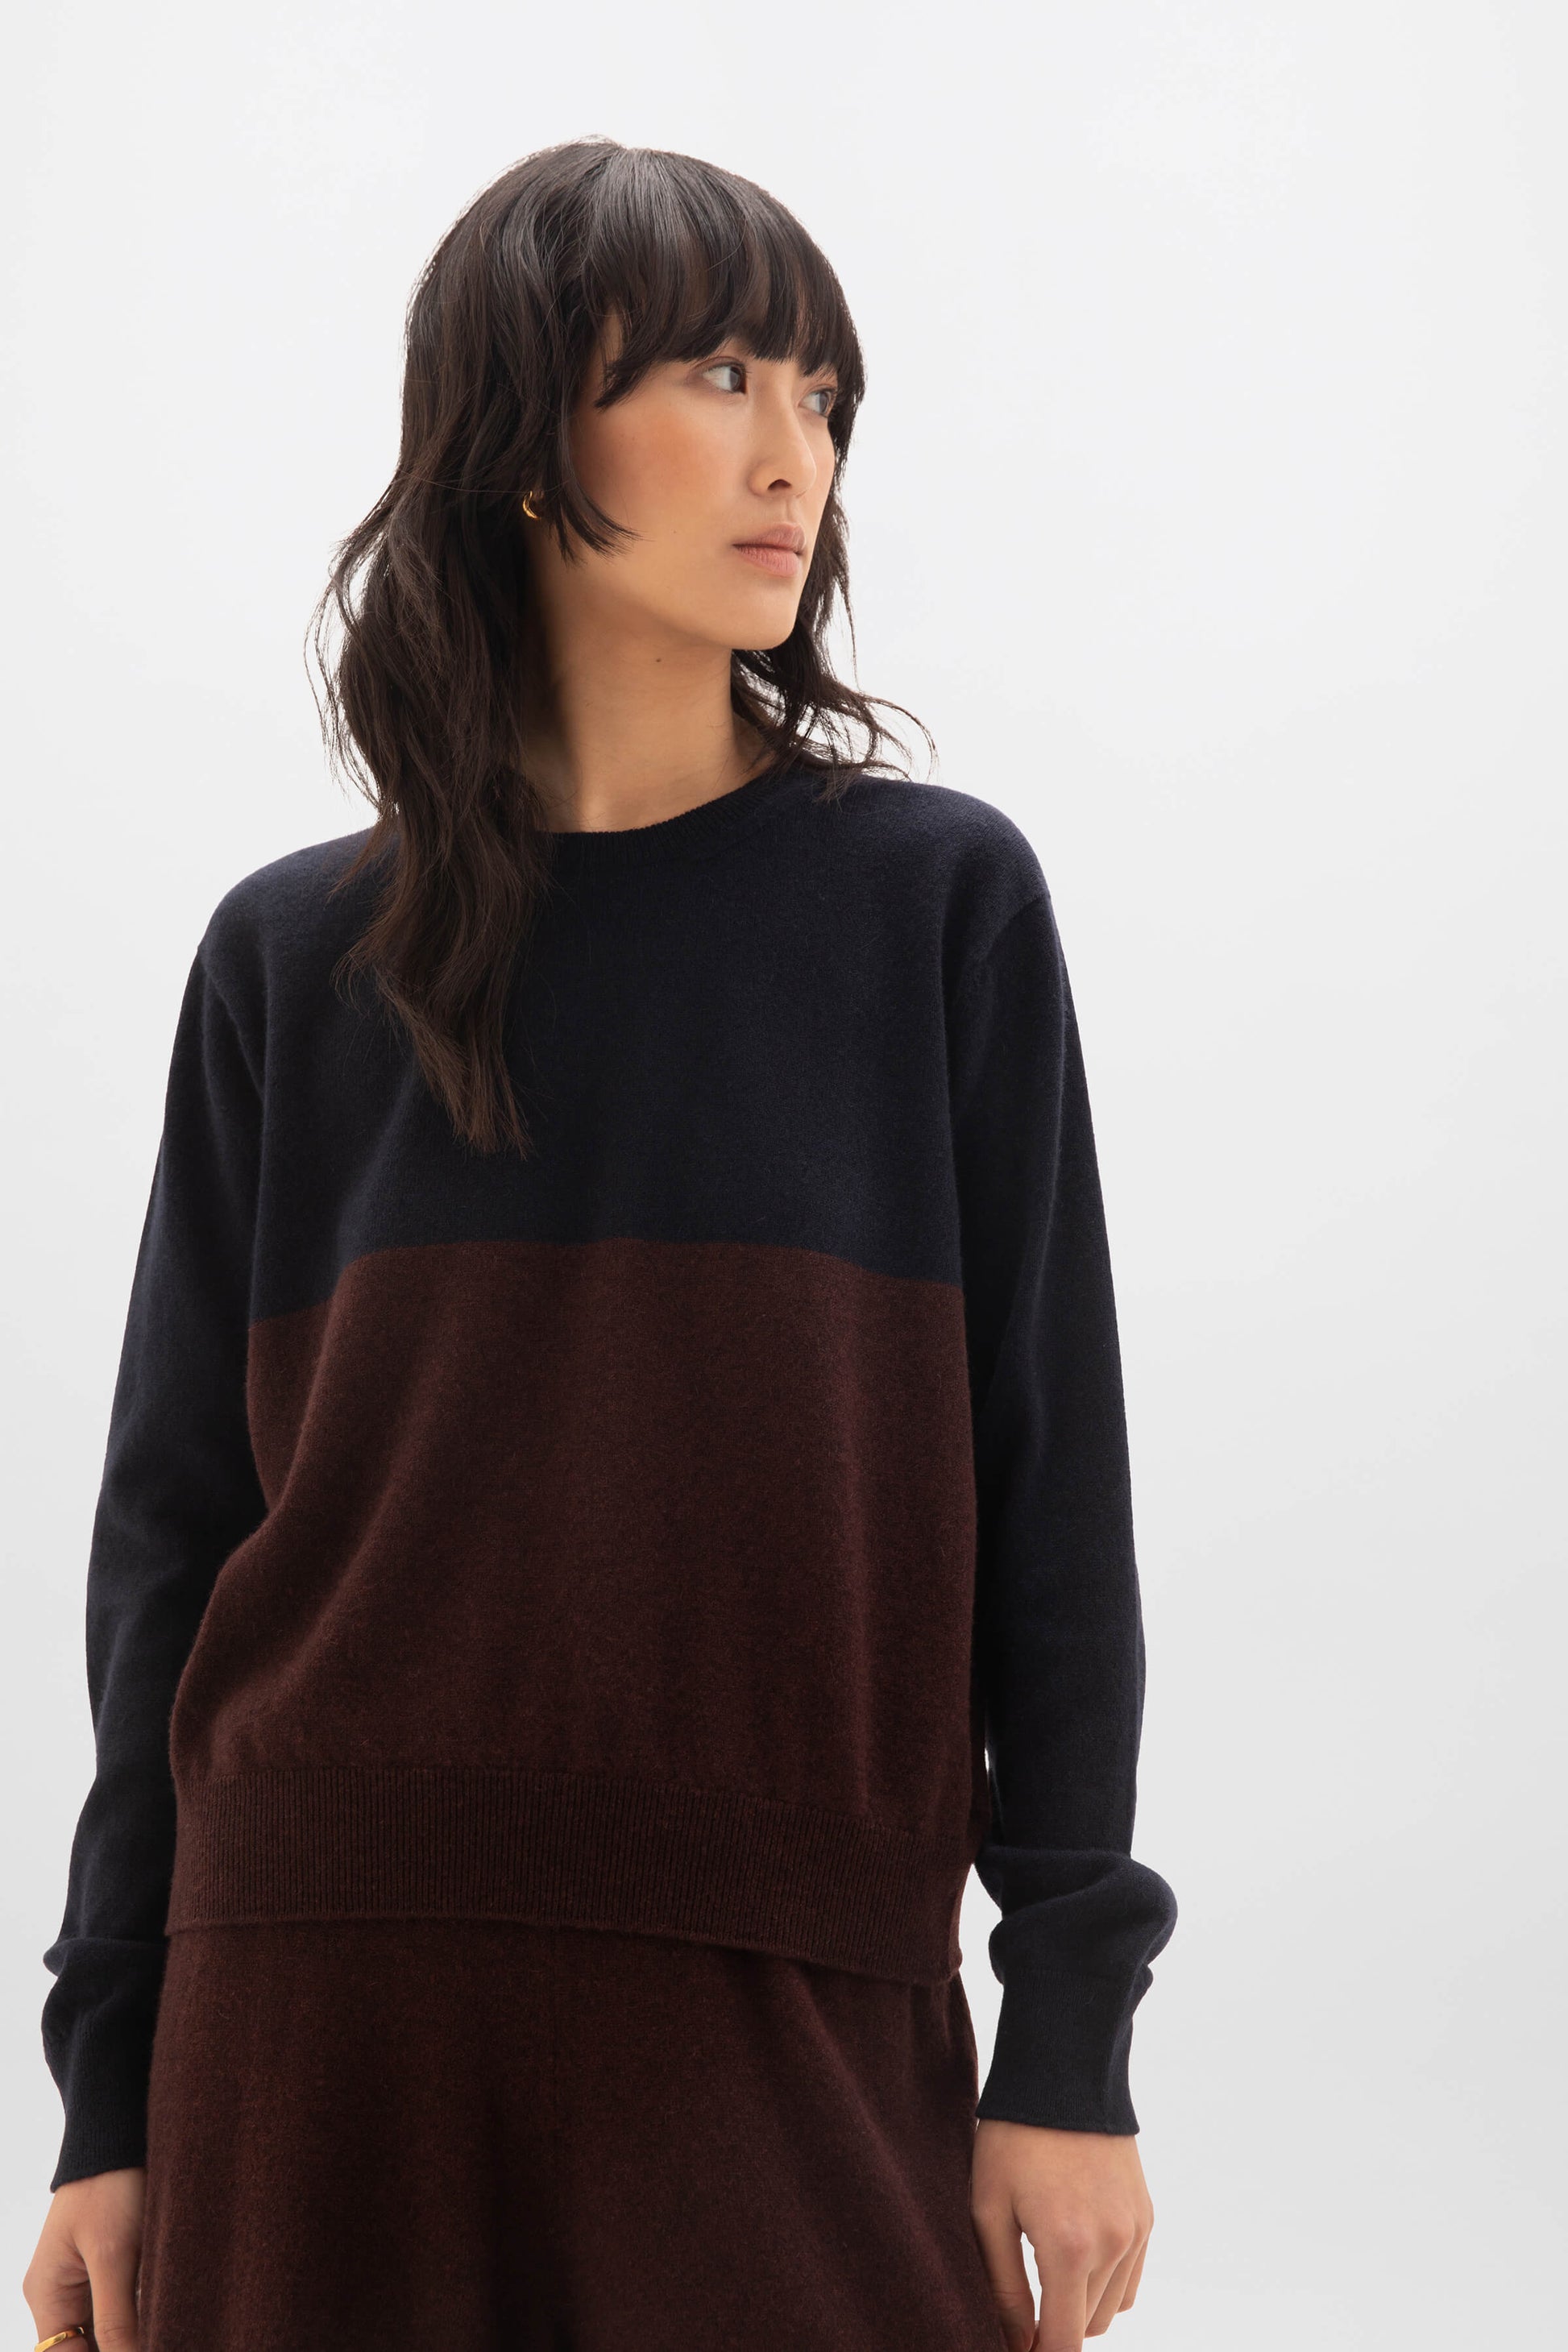 Women's Jumpers  Cashmere Knit Sweaters & Hoodies – Johnstons of Elgin